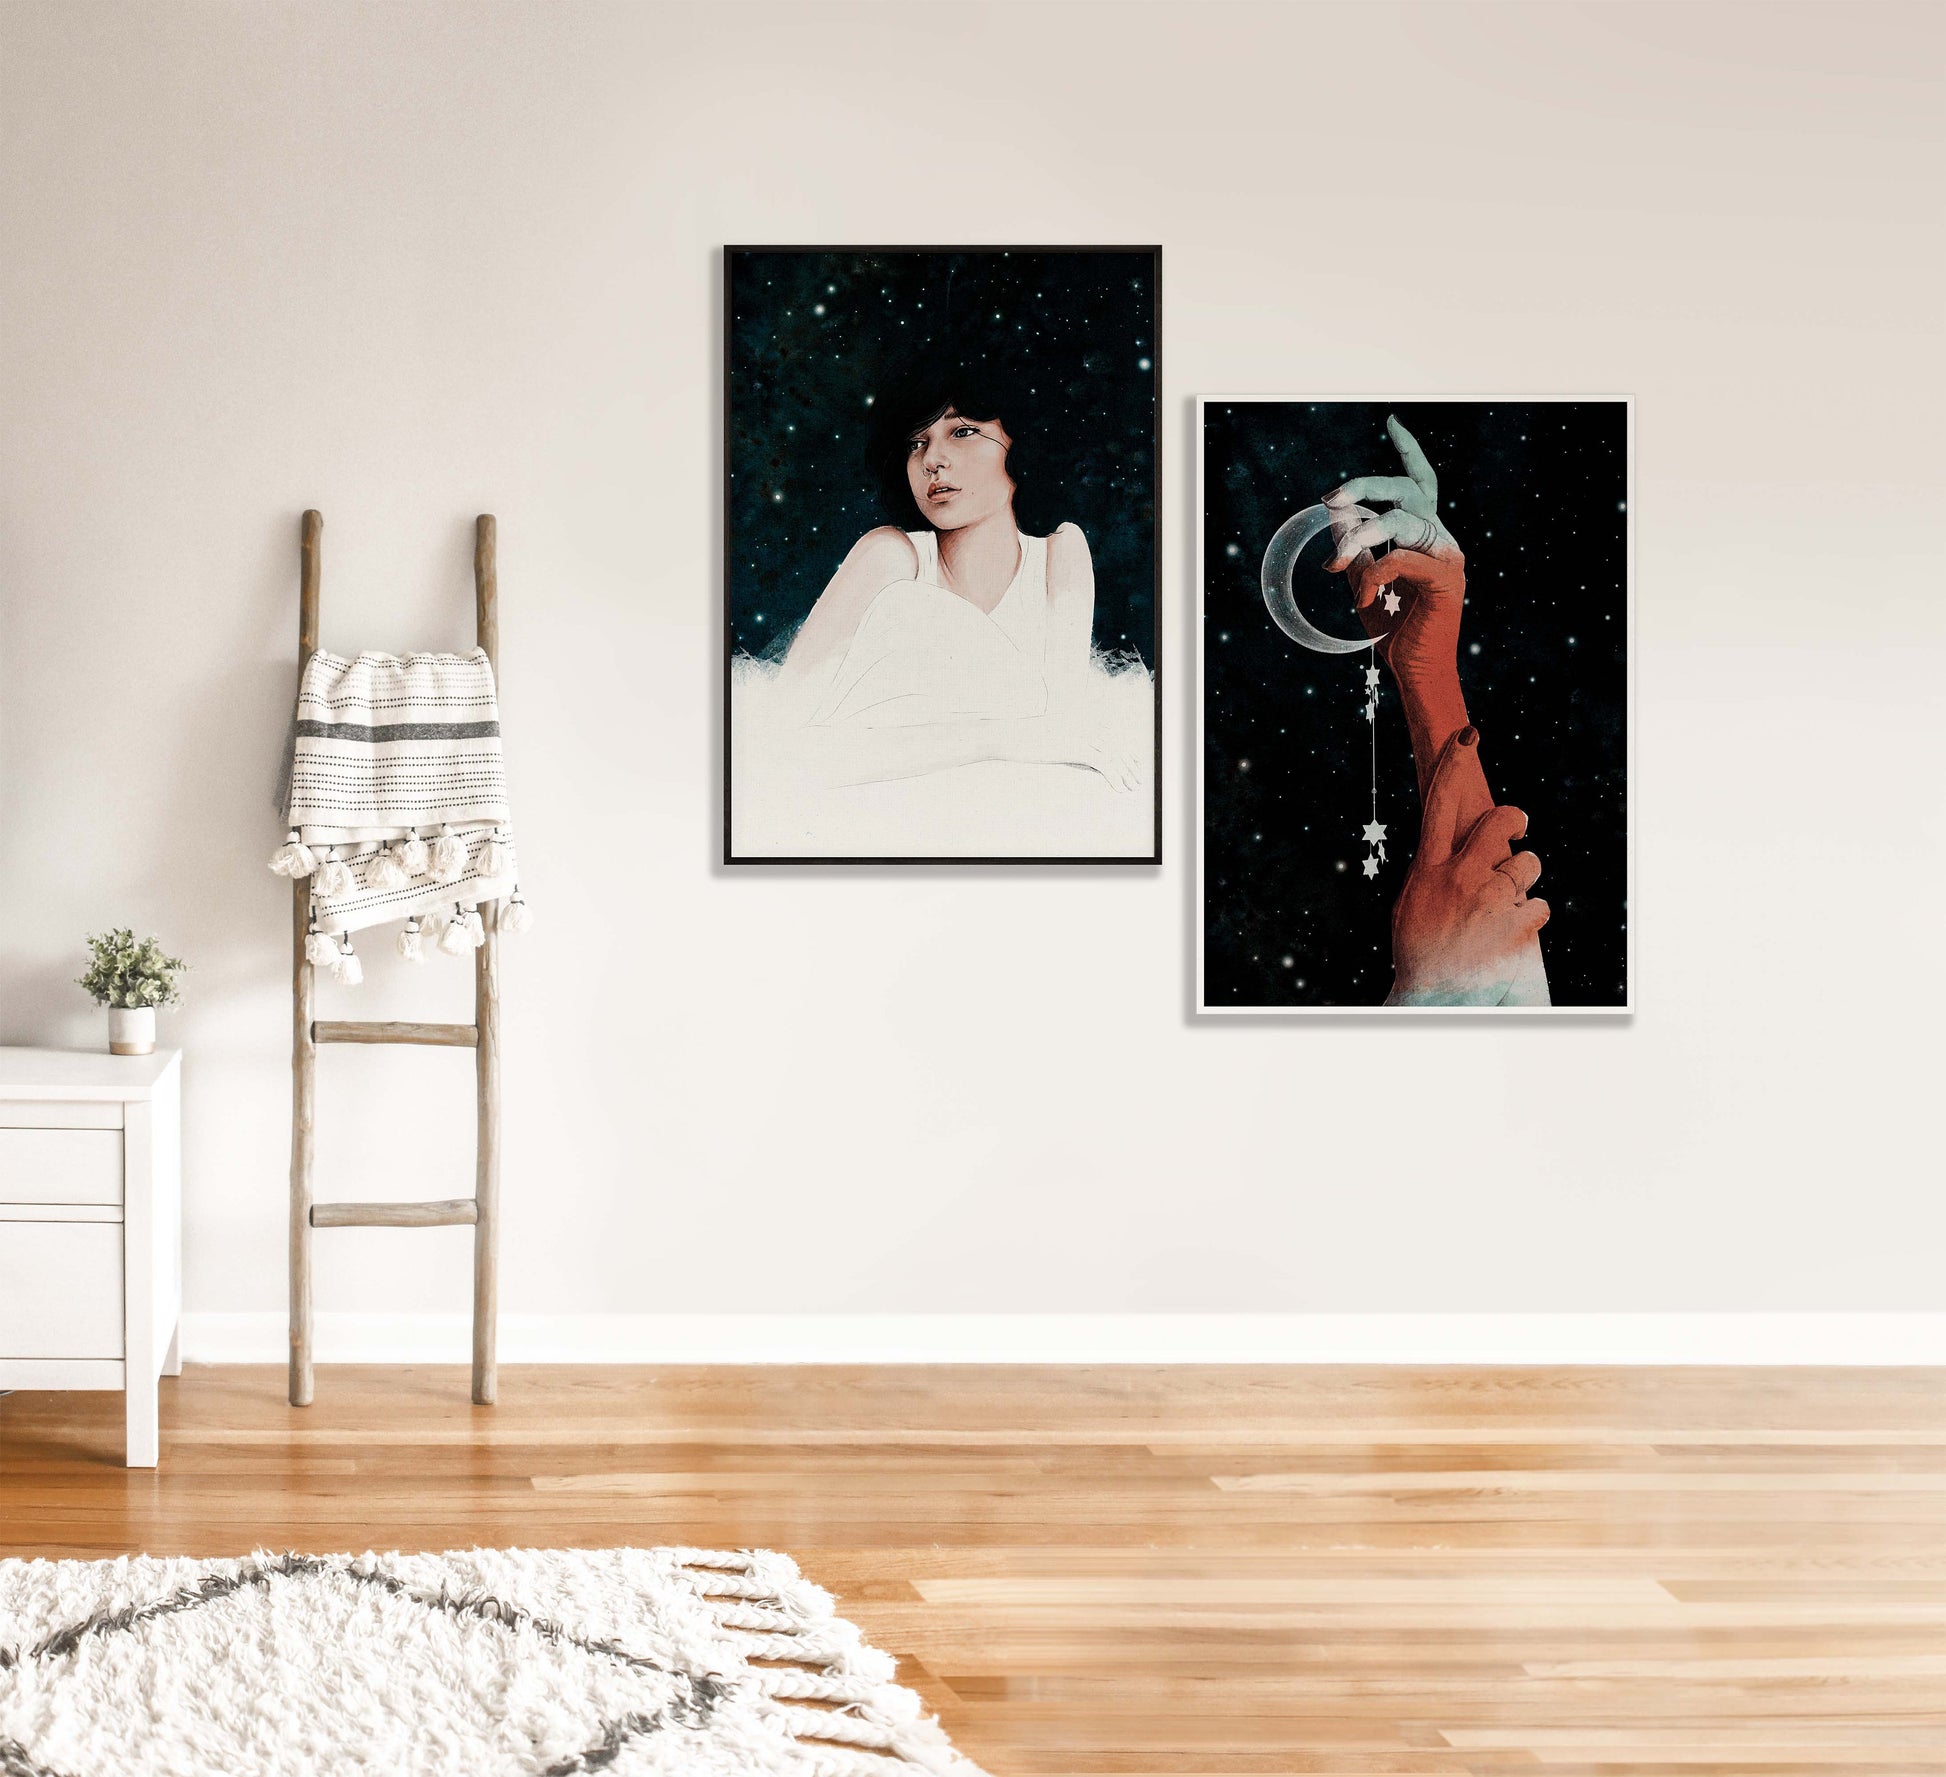 Make All Your Wishes Come True, Celestial Wall Art Poster